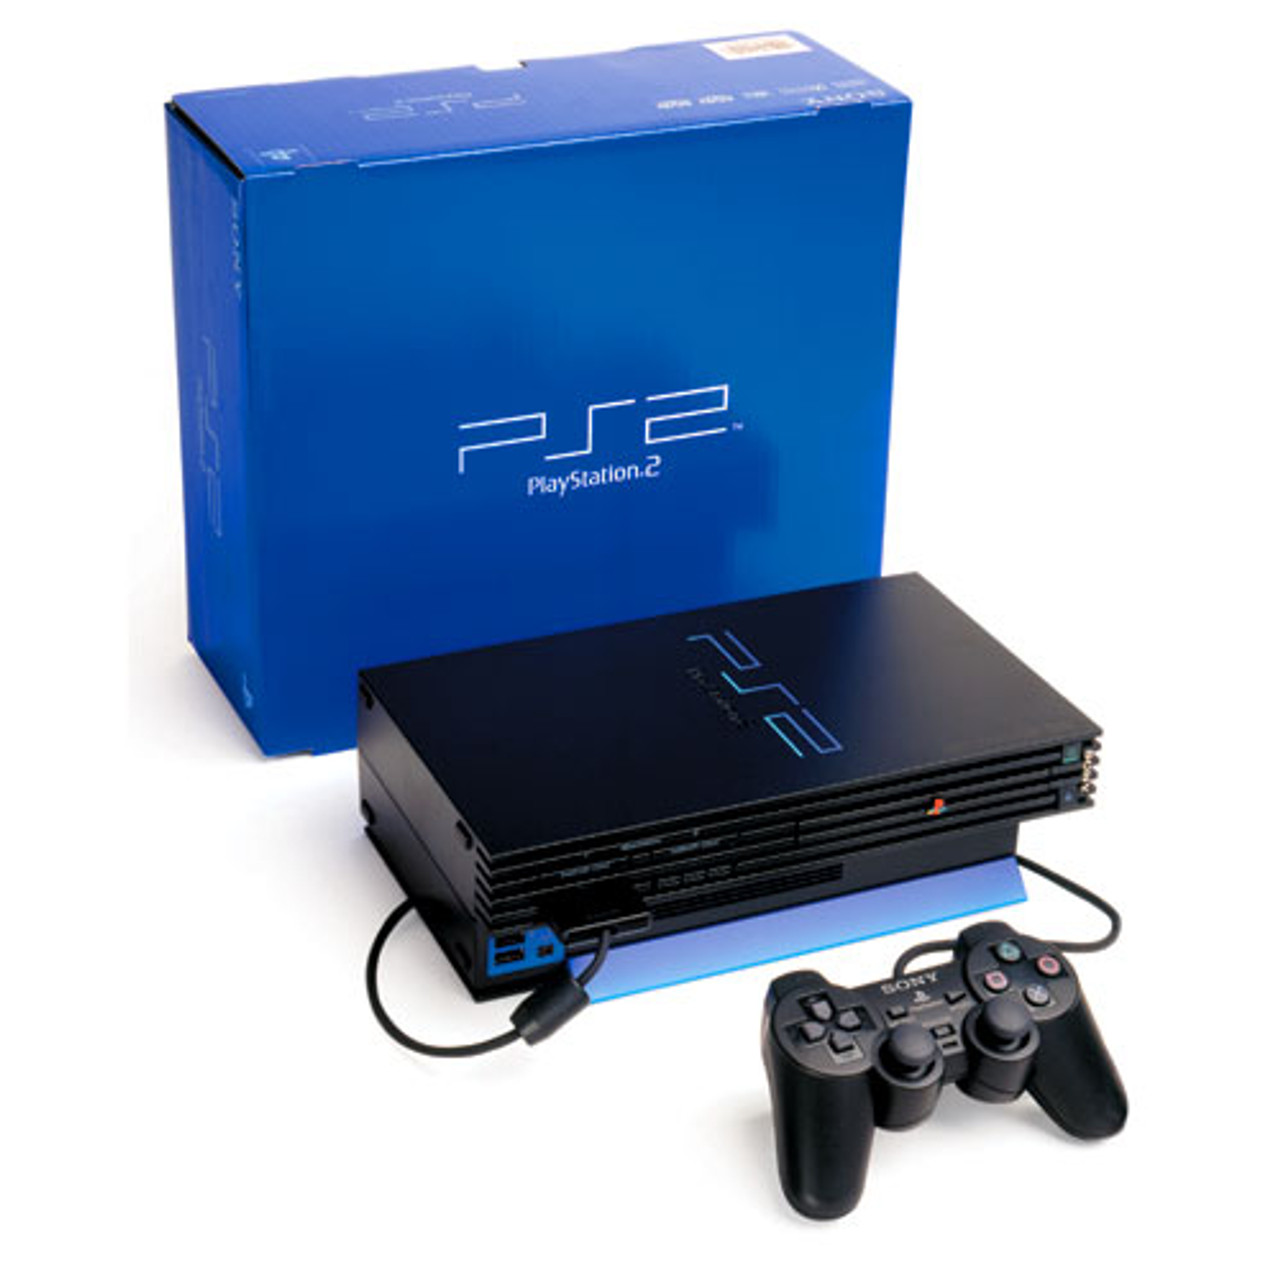 Complete Playstation 2 System In Original Box